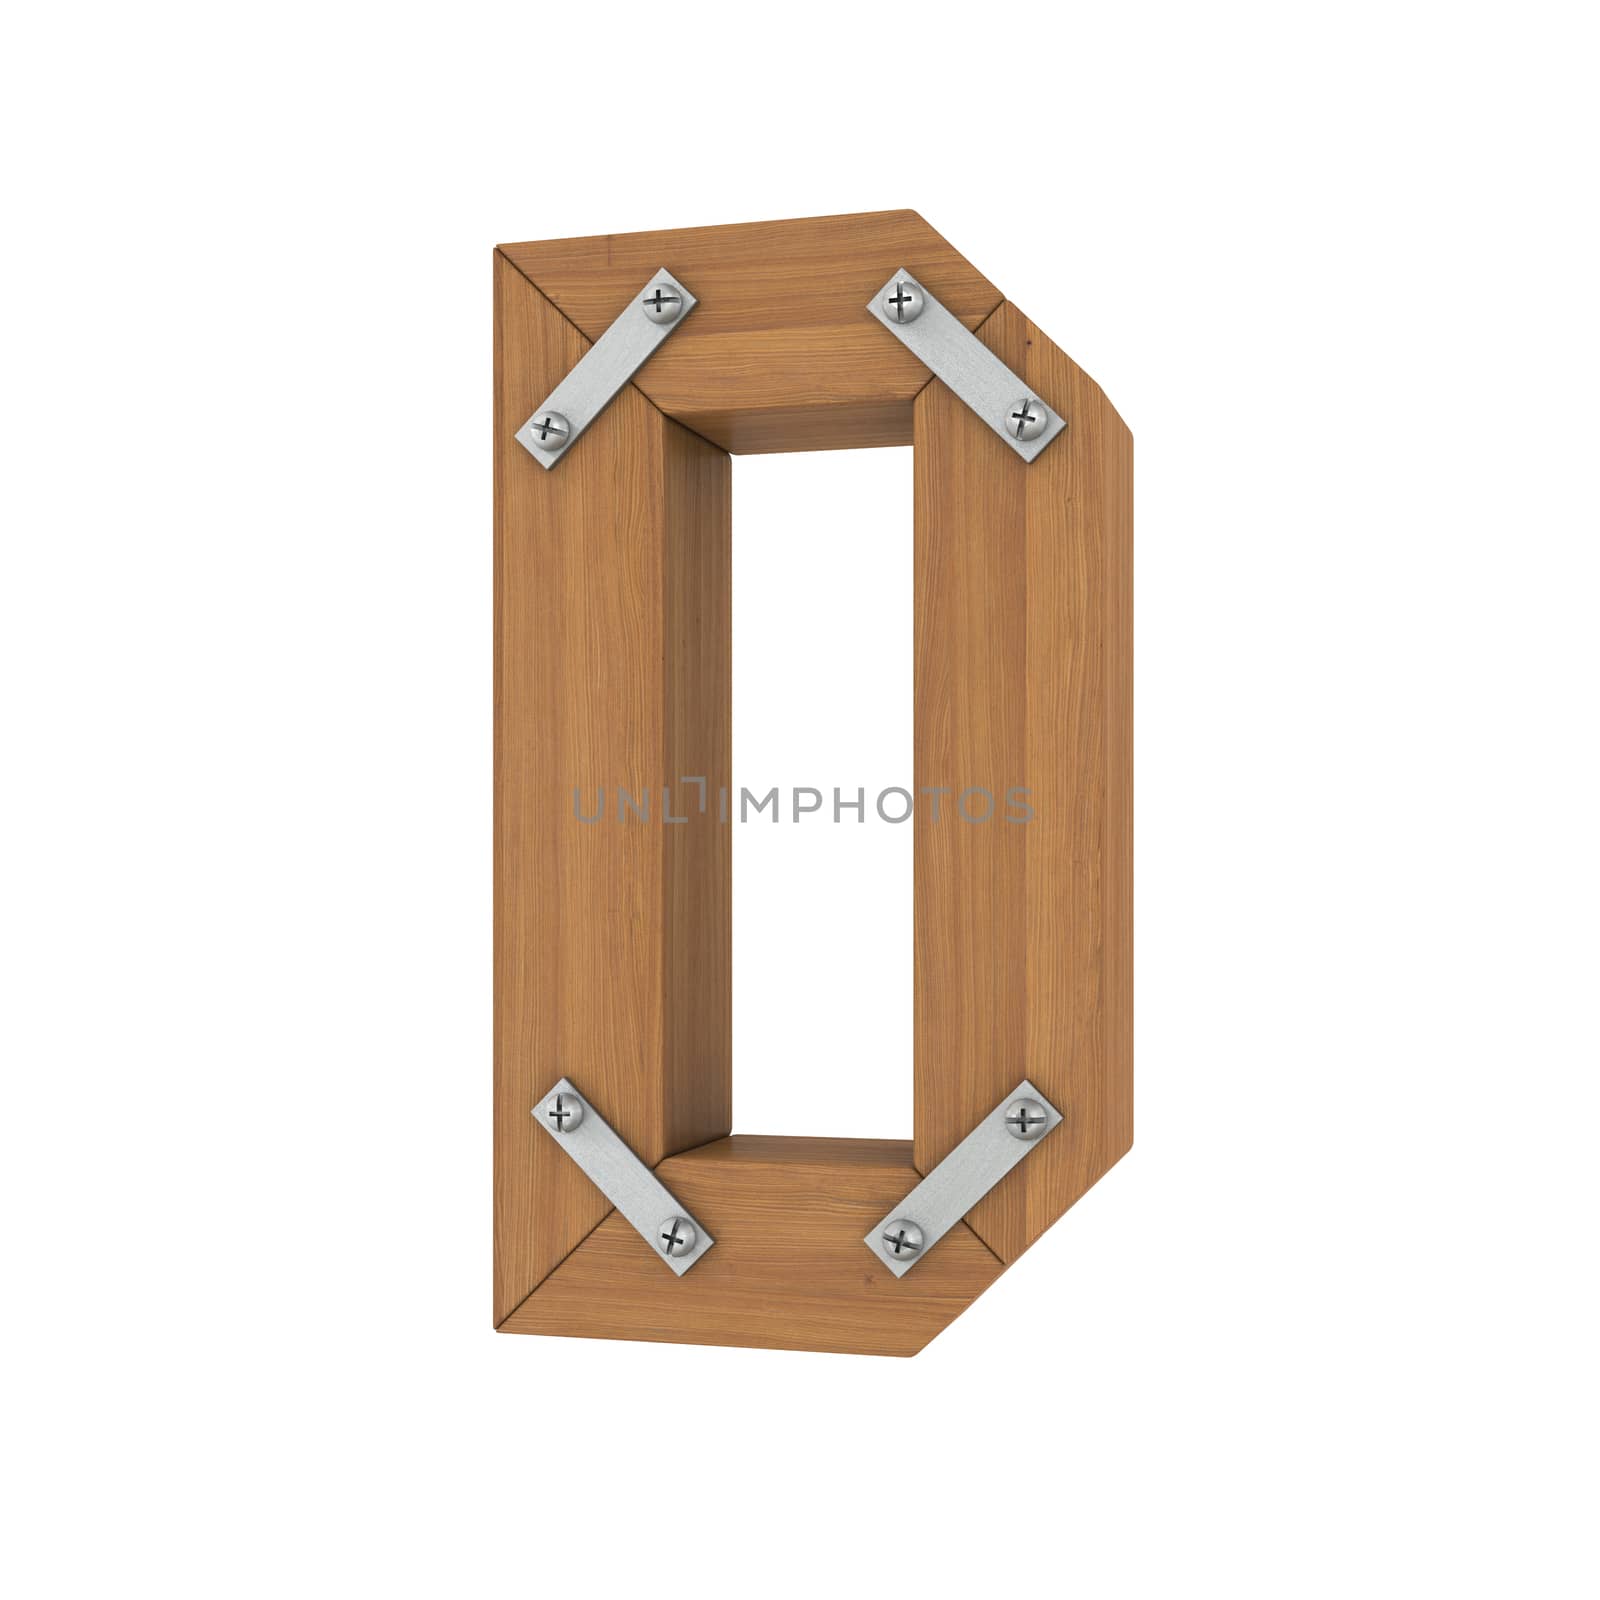 Wooden letter D. Isolated render on a white background